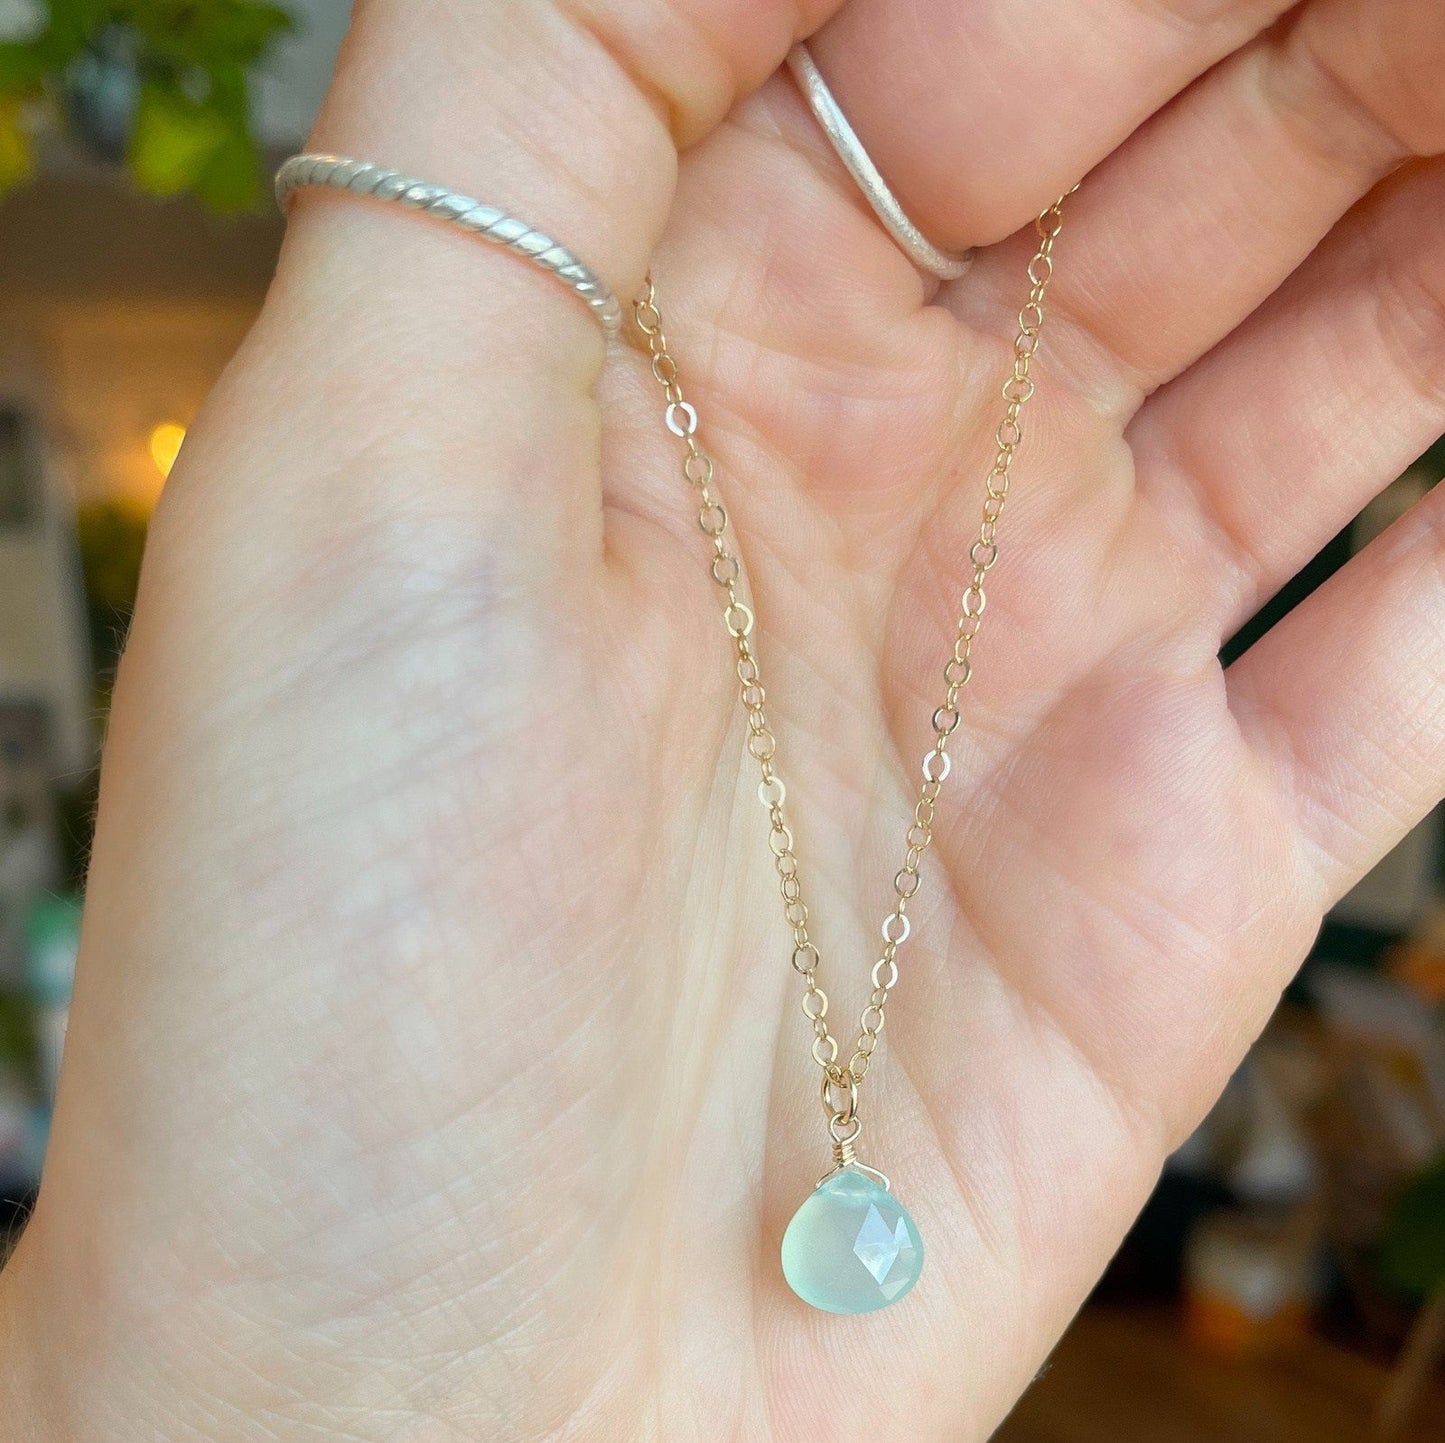 Wanderlust Life Fine Gold Chain Necklace - Sea Glass Chalcedony